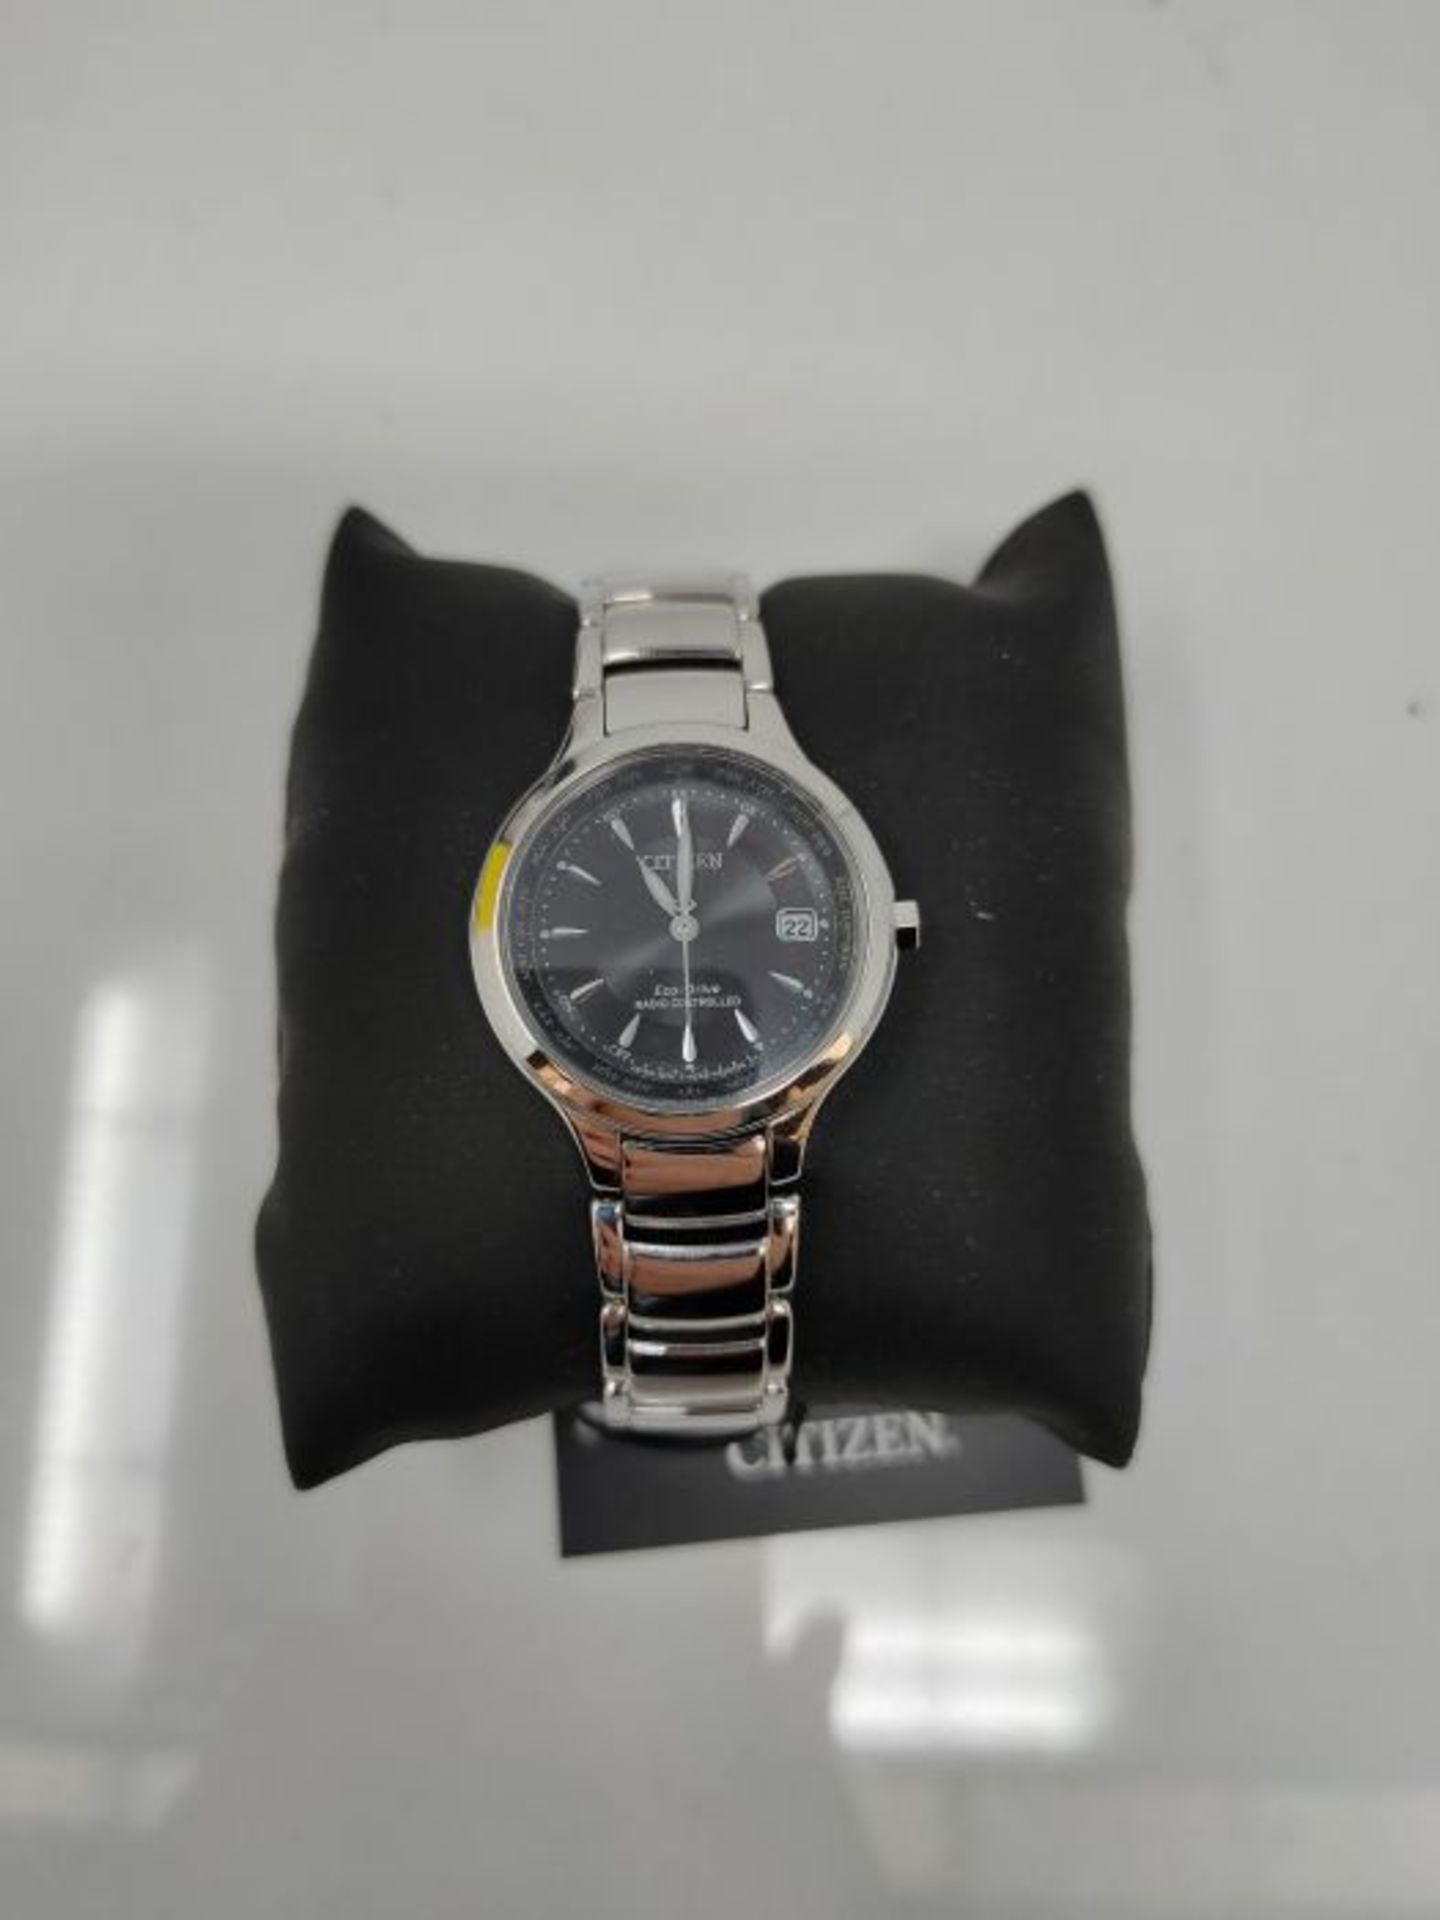 RRP £273.00 Citizen Womens Analogue Watch with Stainless Steel Strap EC1170-85E - Image 3 of 3